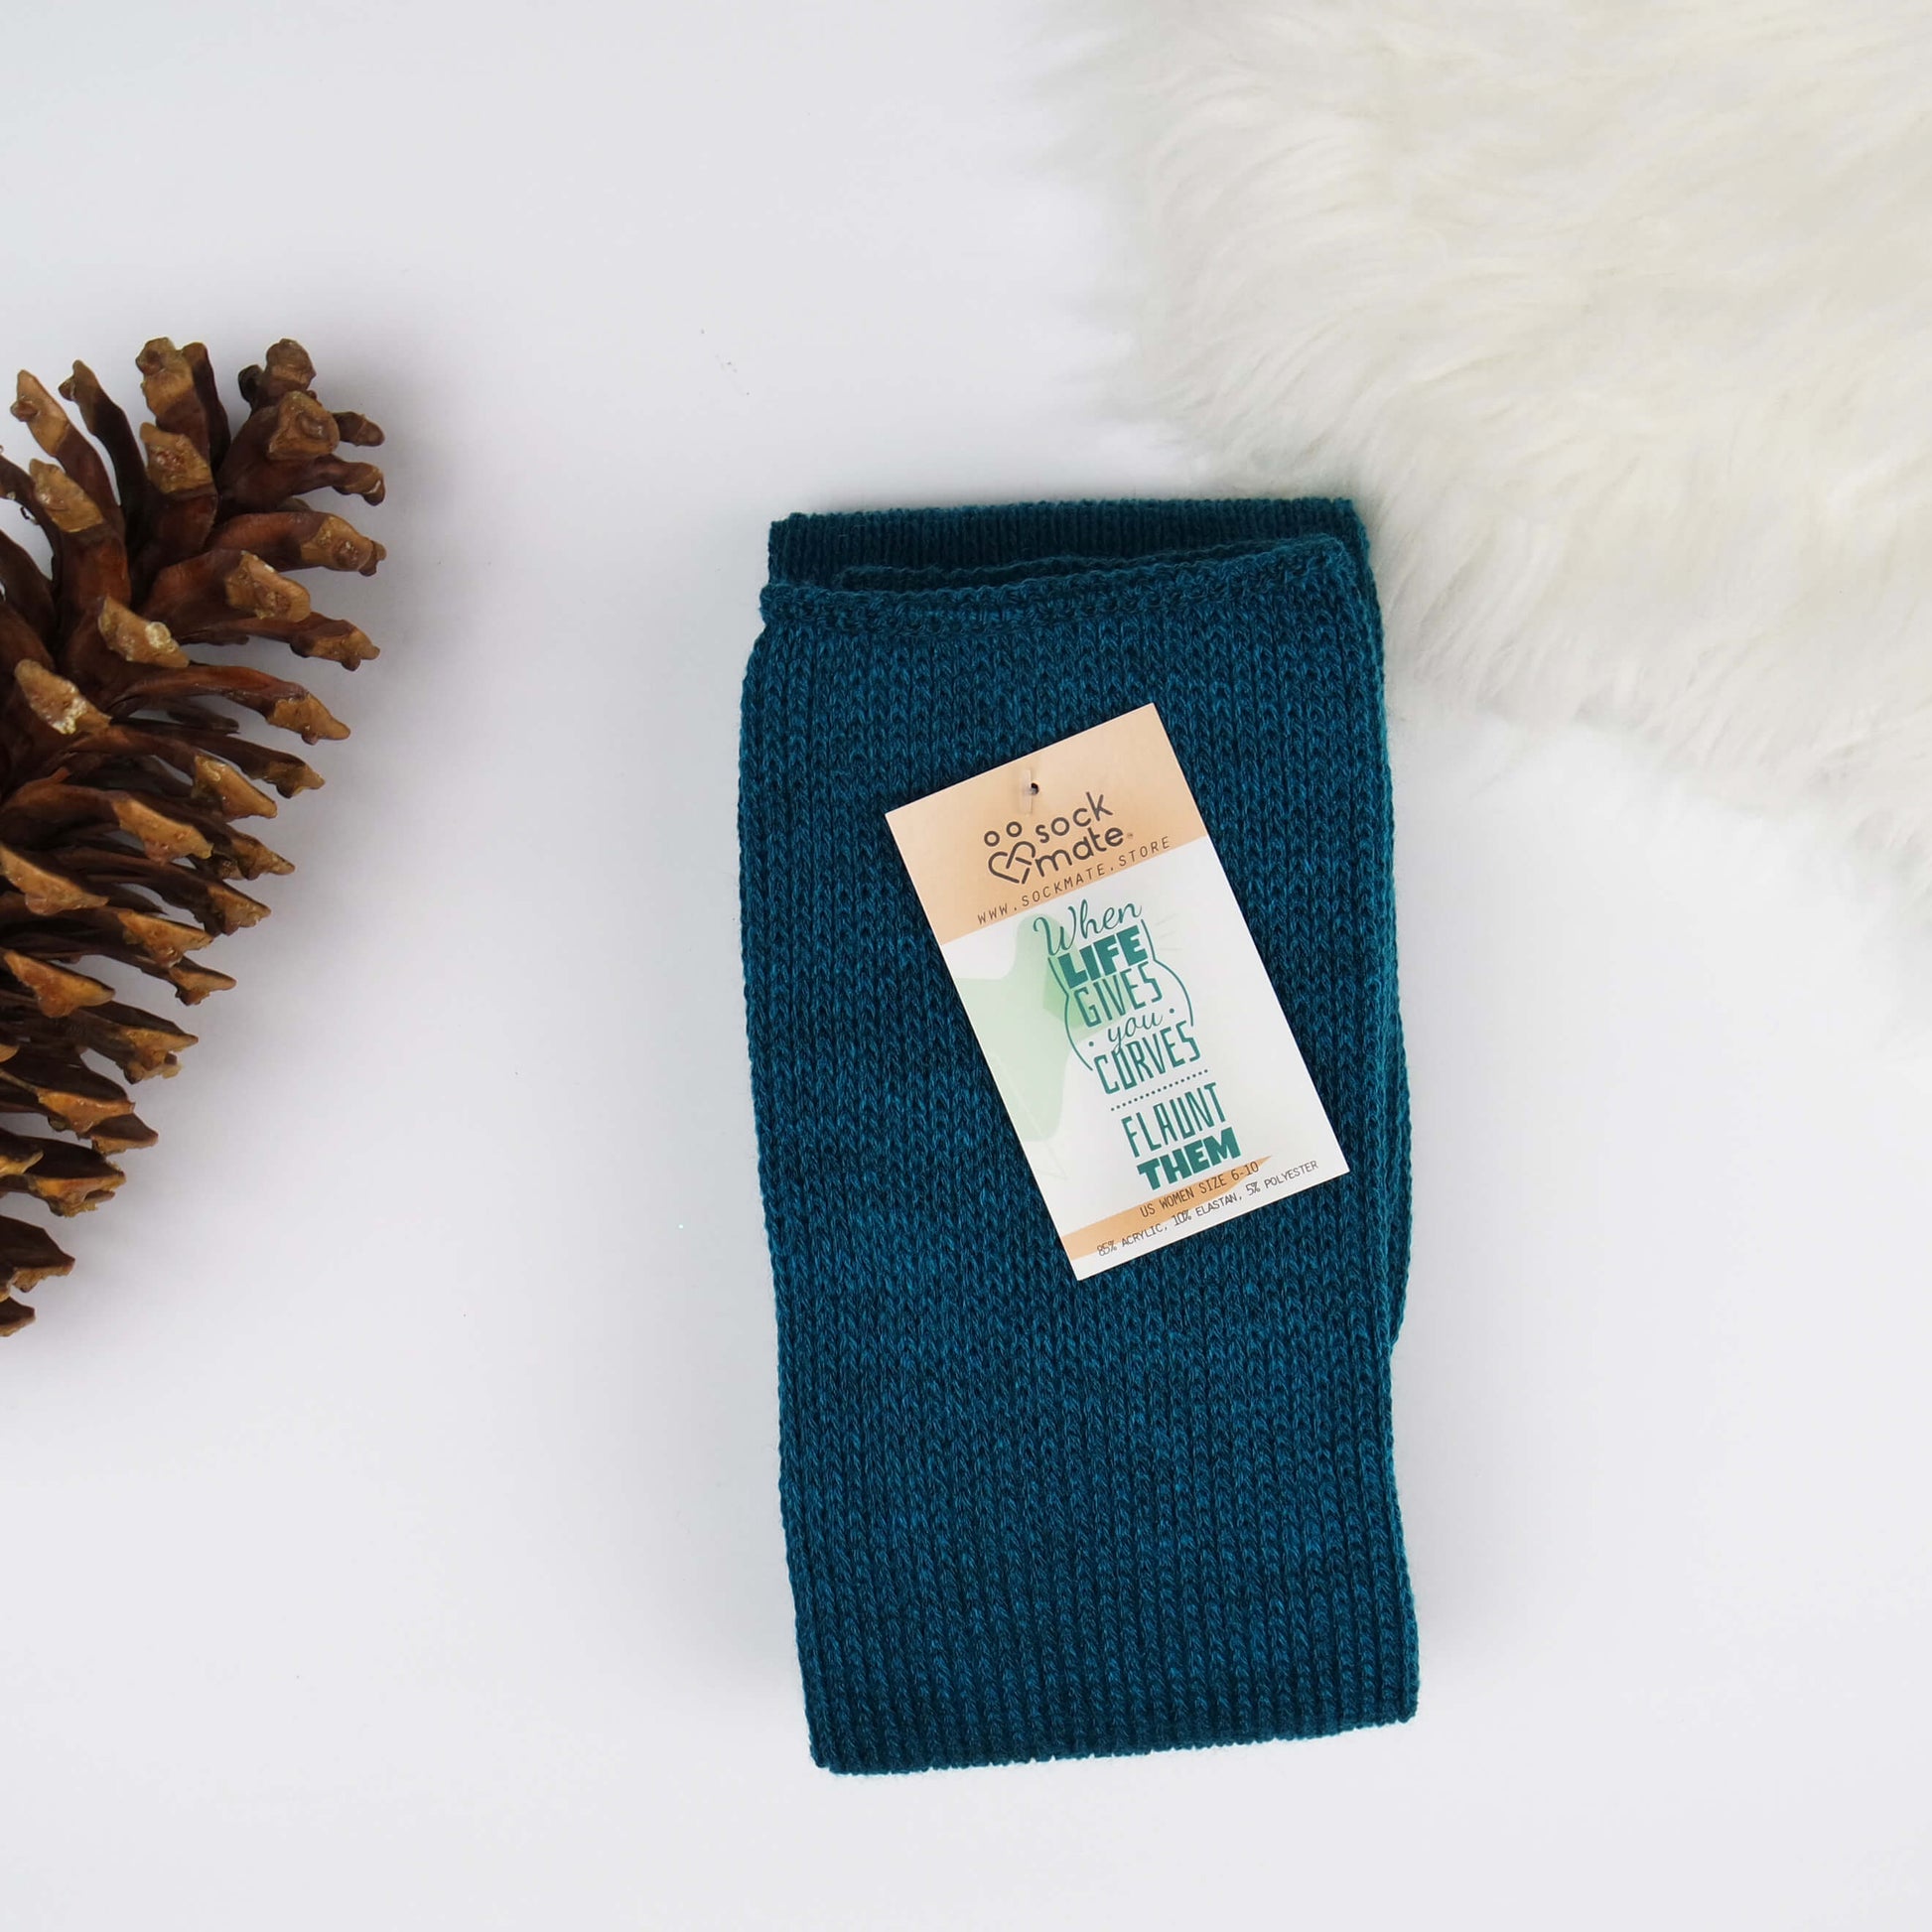 Plus size thigh high socks in a delightful shade of teal, providing a fashionable and inclusive choice for all body types.